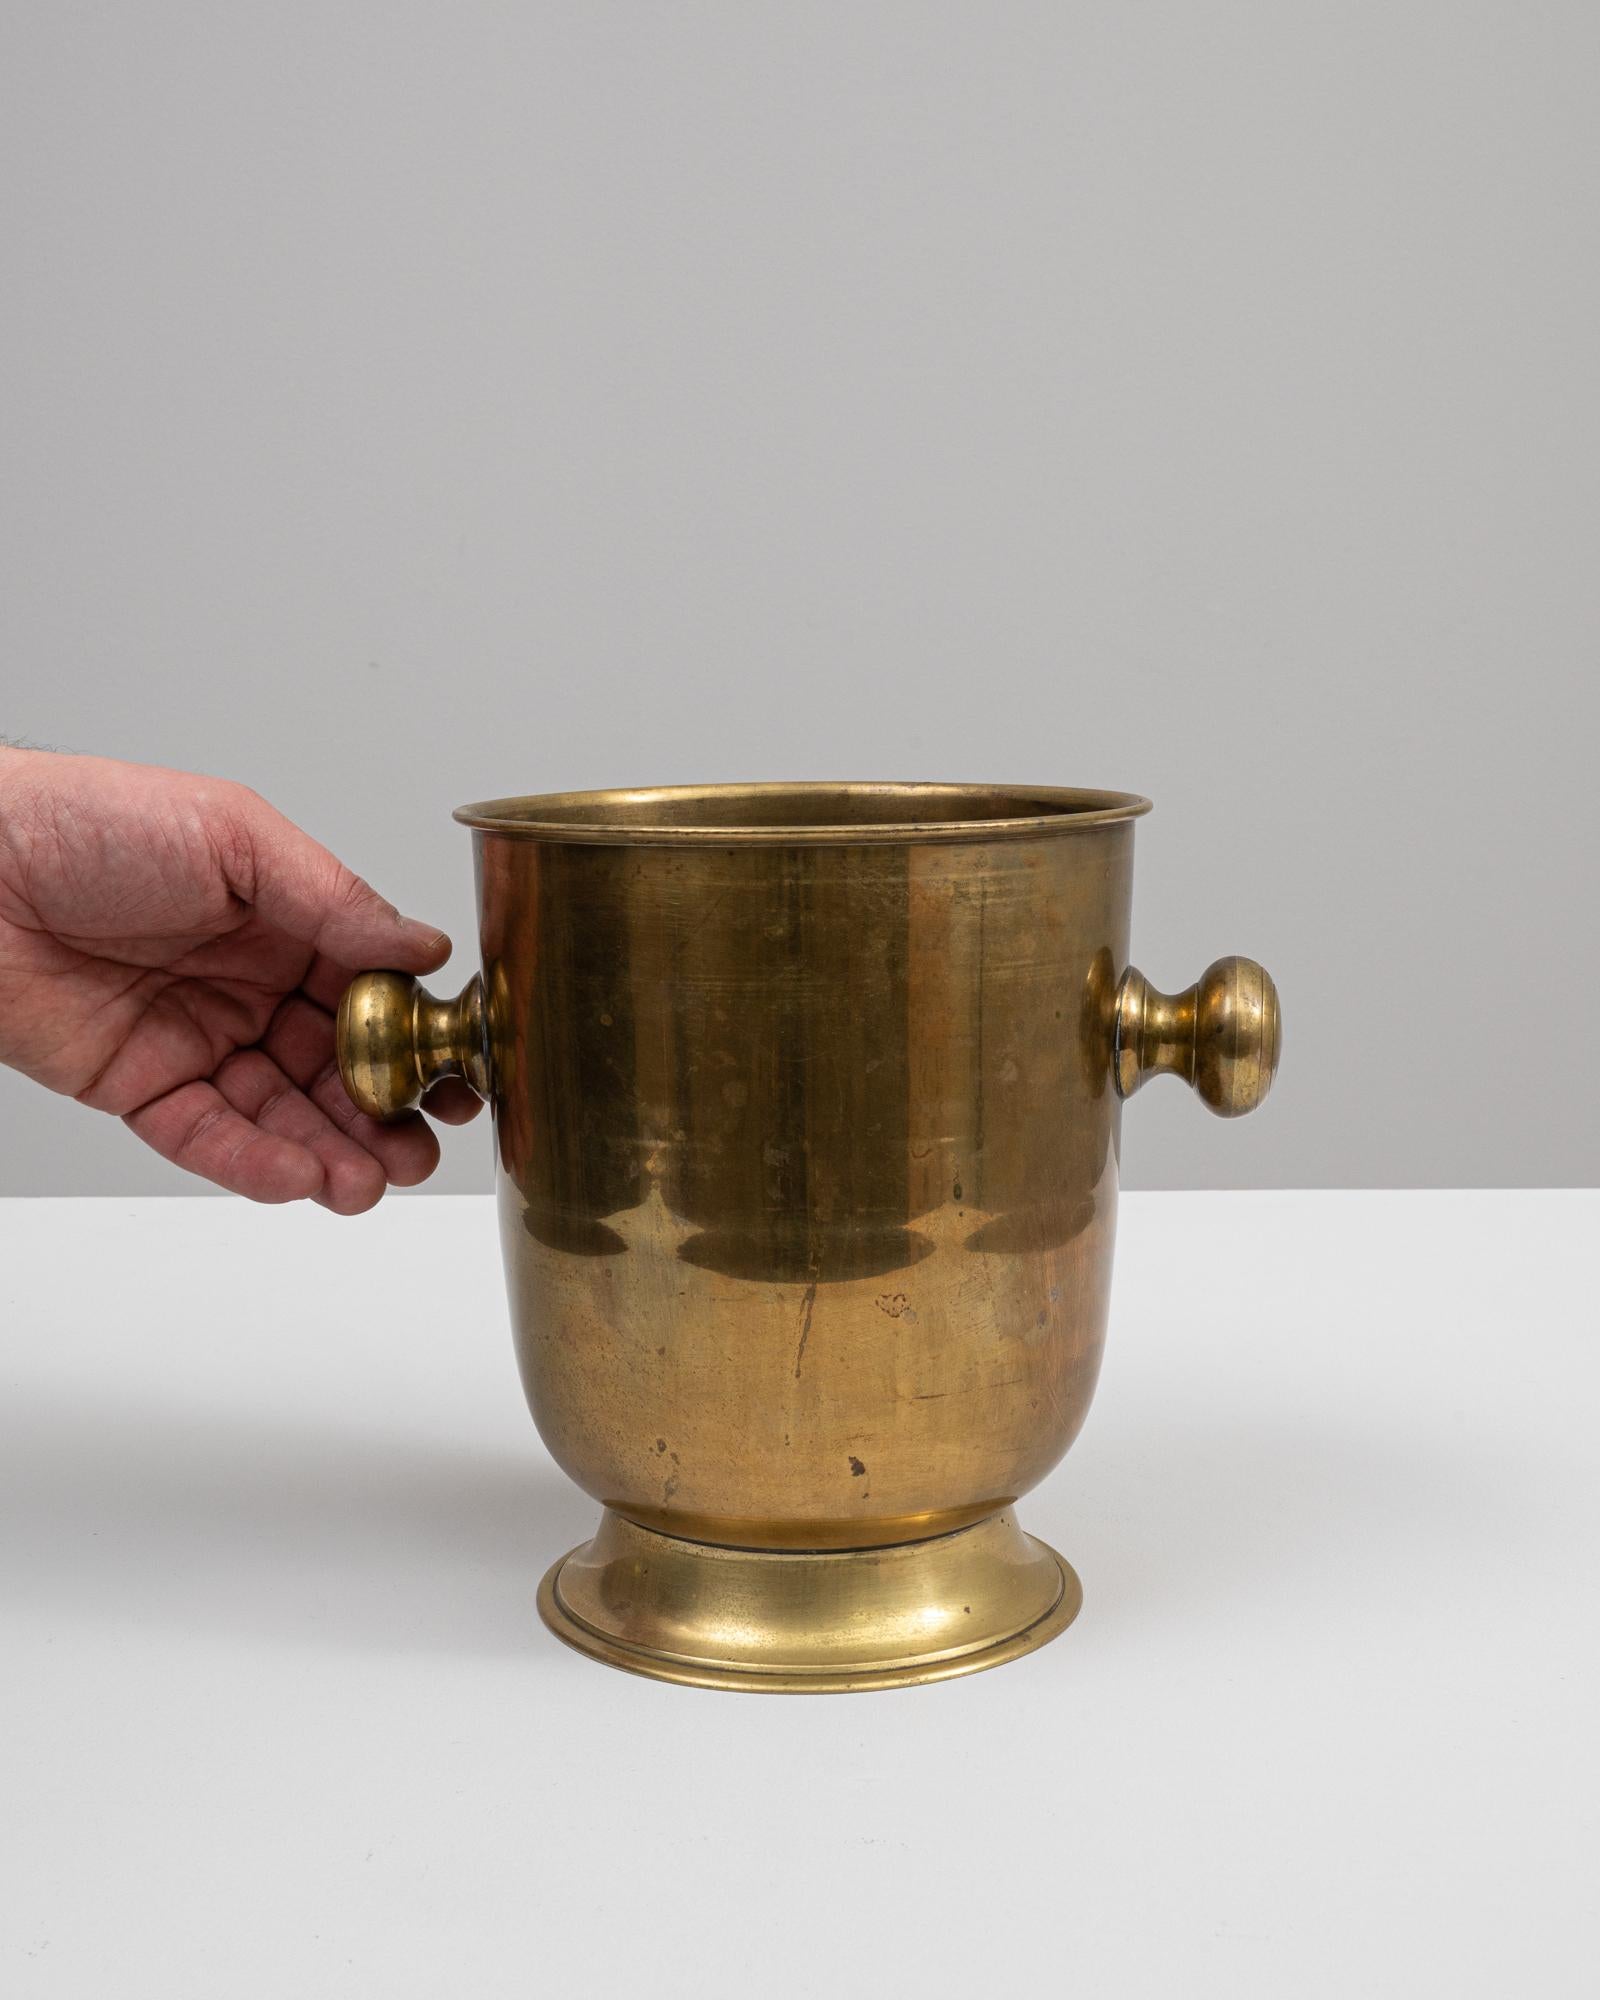 Behold the resplendent Early 20th Century Belgian Brass Ice Bucket, a piece that marries functionality with an air of sophisticated history. Crafted in the heart of Belgium, this brass bucket radiates a warm, golden glow, its patina telling tales of